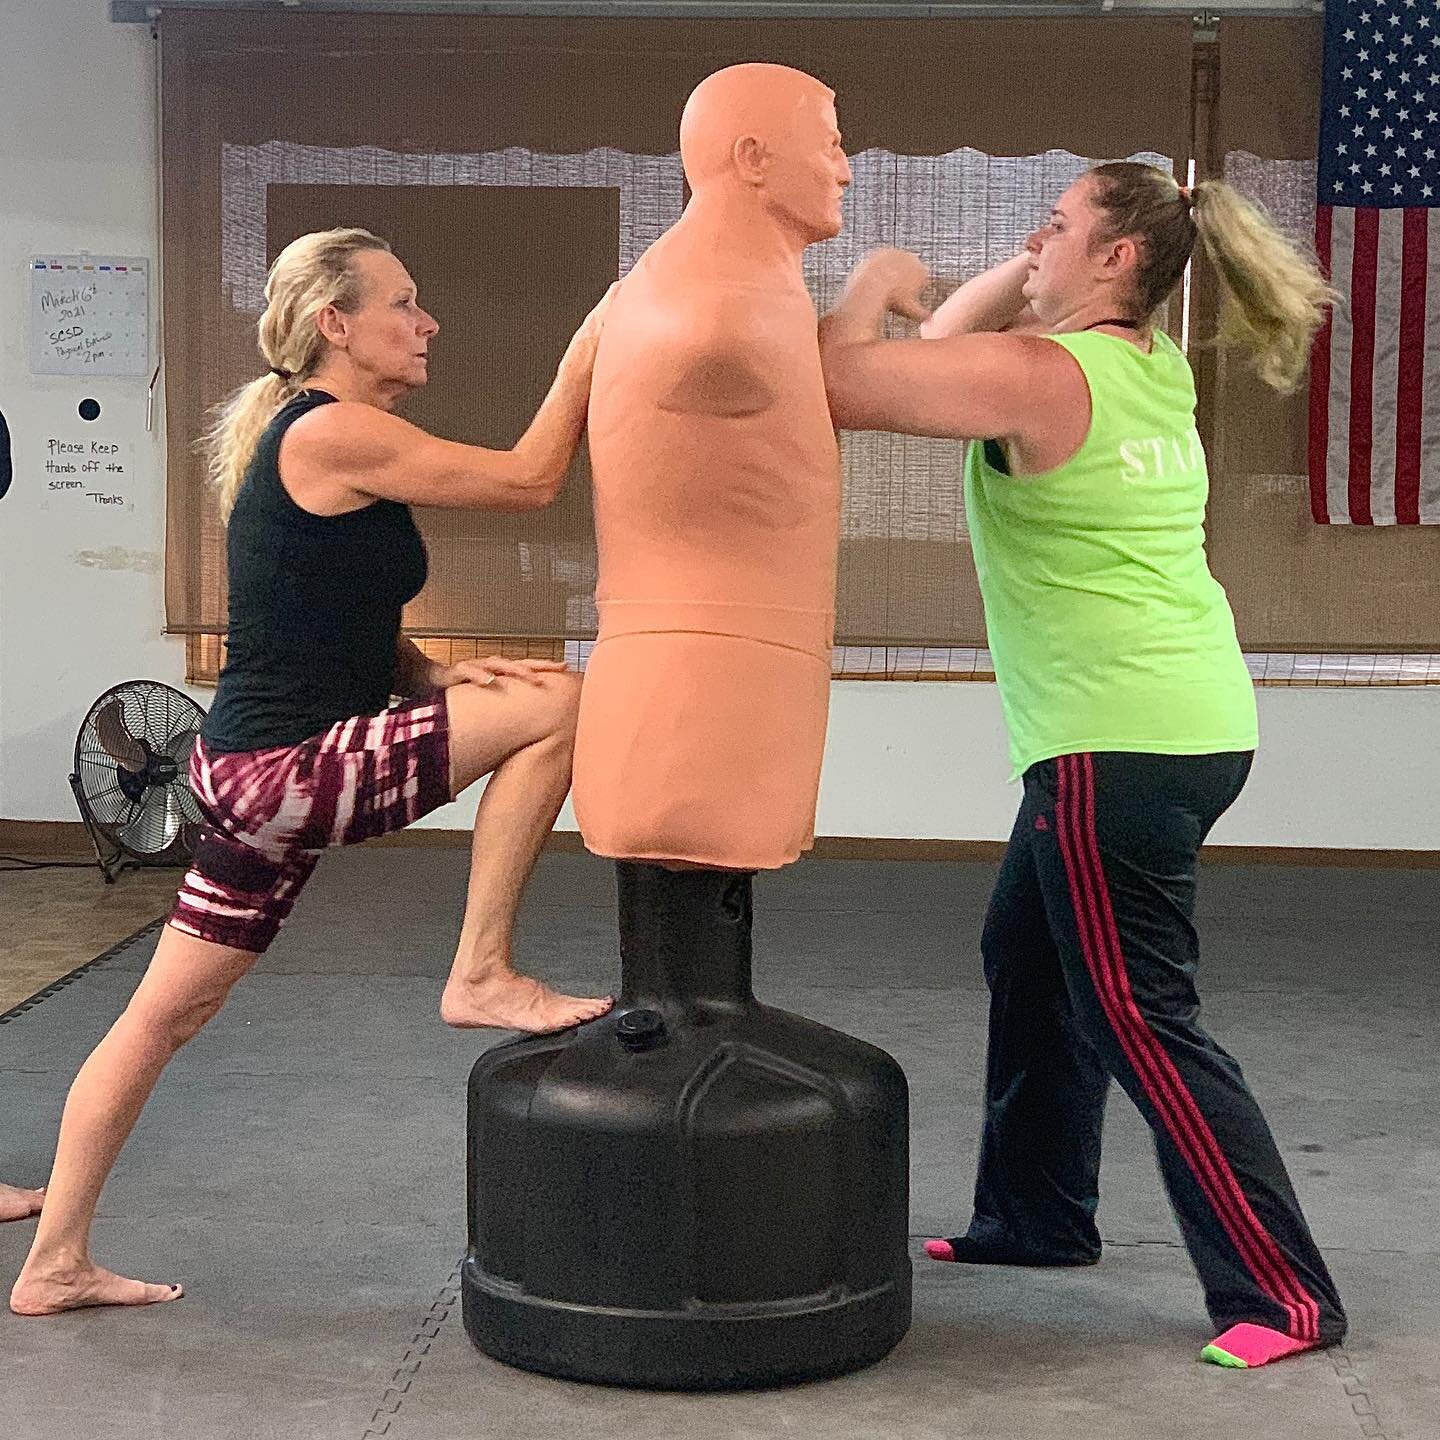 Elbow strikes for our Tuesday night 🥊 

Interested in our classes? Send us a DM or contact us at steelcityselfdefense@gmail.com! 🥊 

#steelcityselfdefense #pueblo #pueblocolorado #puebloshares #selfdefense #selfdefensepueblo #selfdefenseclass